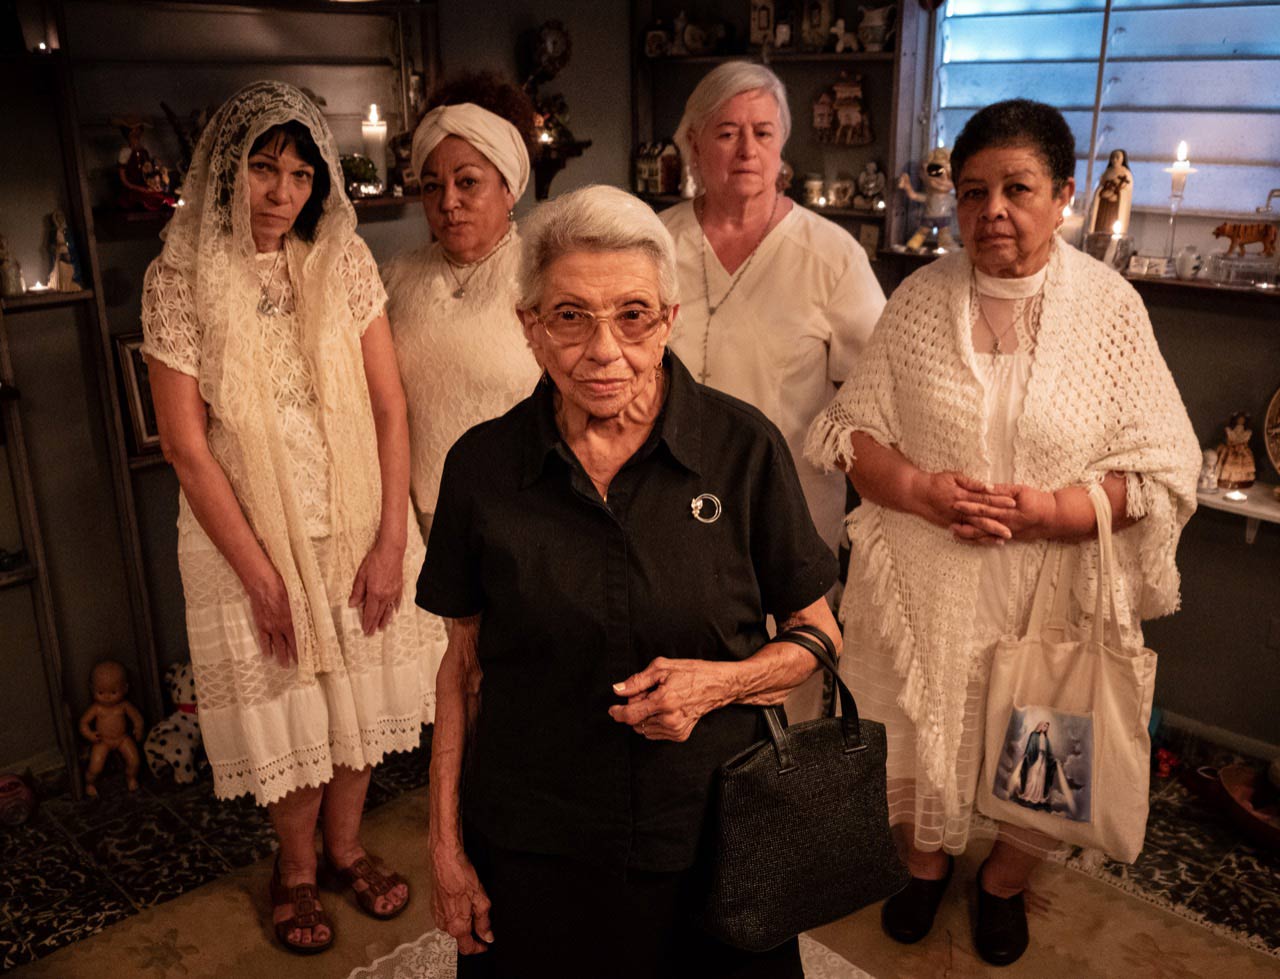 Four older women wearing all white standing behind an older woman in all black